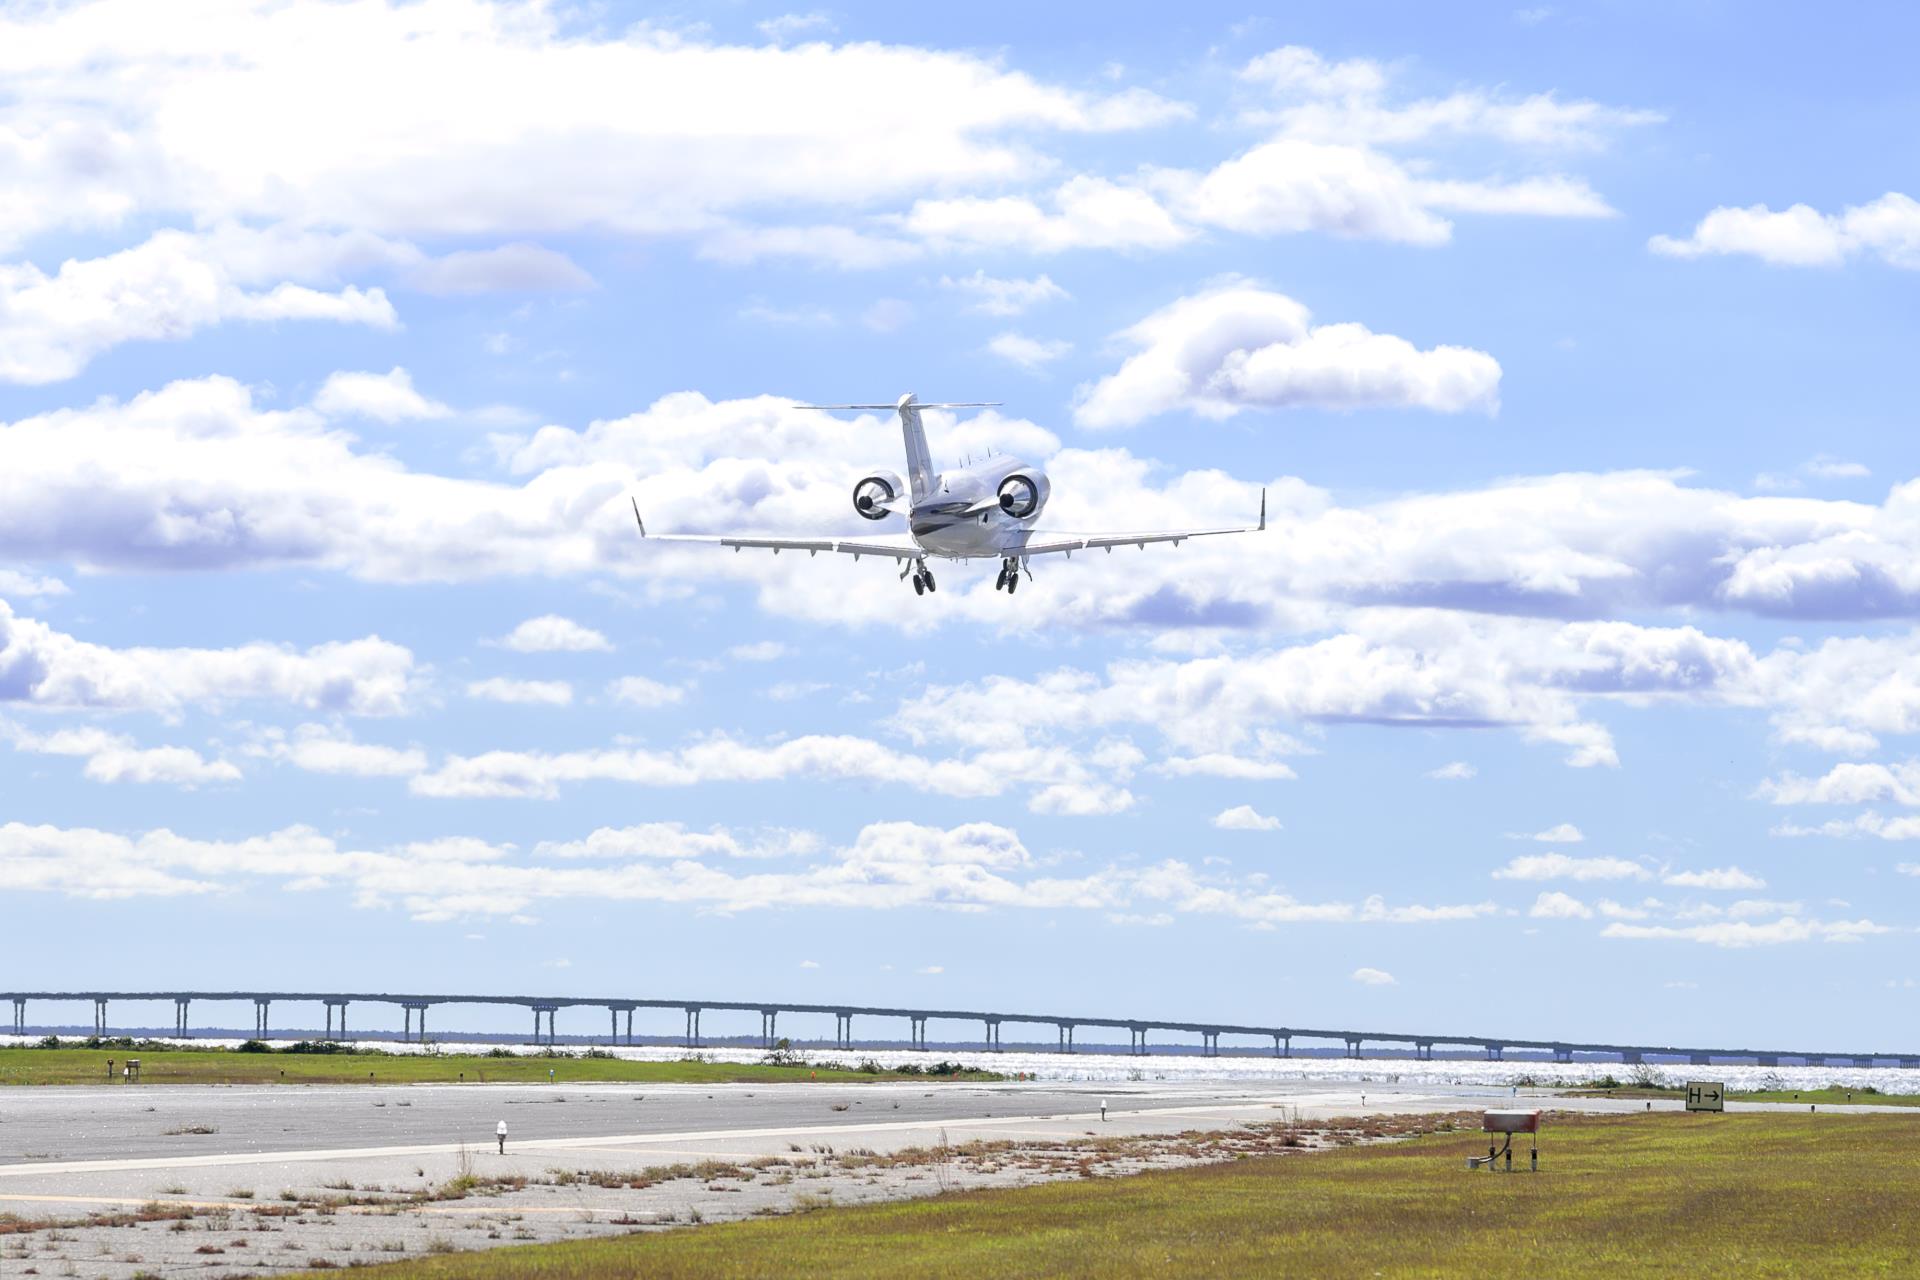 An airport takes flight at the Dare County Regional Airport